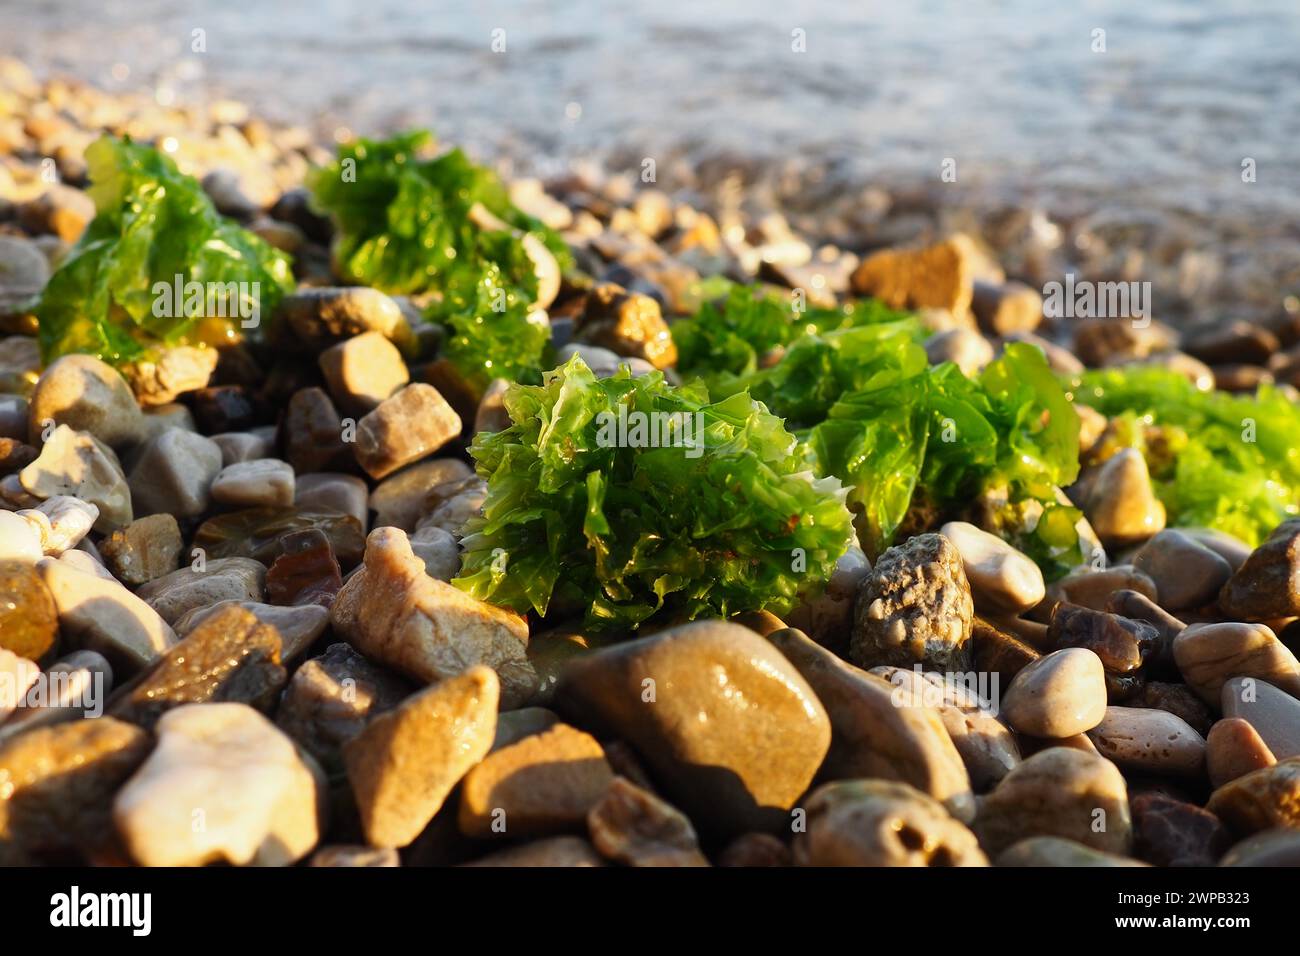 Ulva, a genus of marine green algae of the Ulvaceae family. Many species are edible sea lettuce. Algae are thrown onto the pebbles by a wave Stock Photo